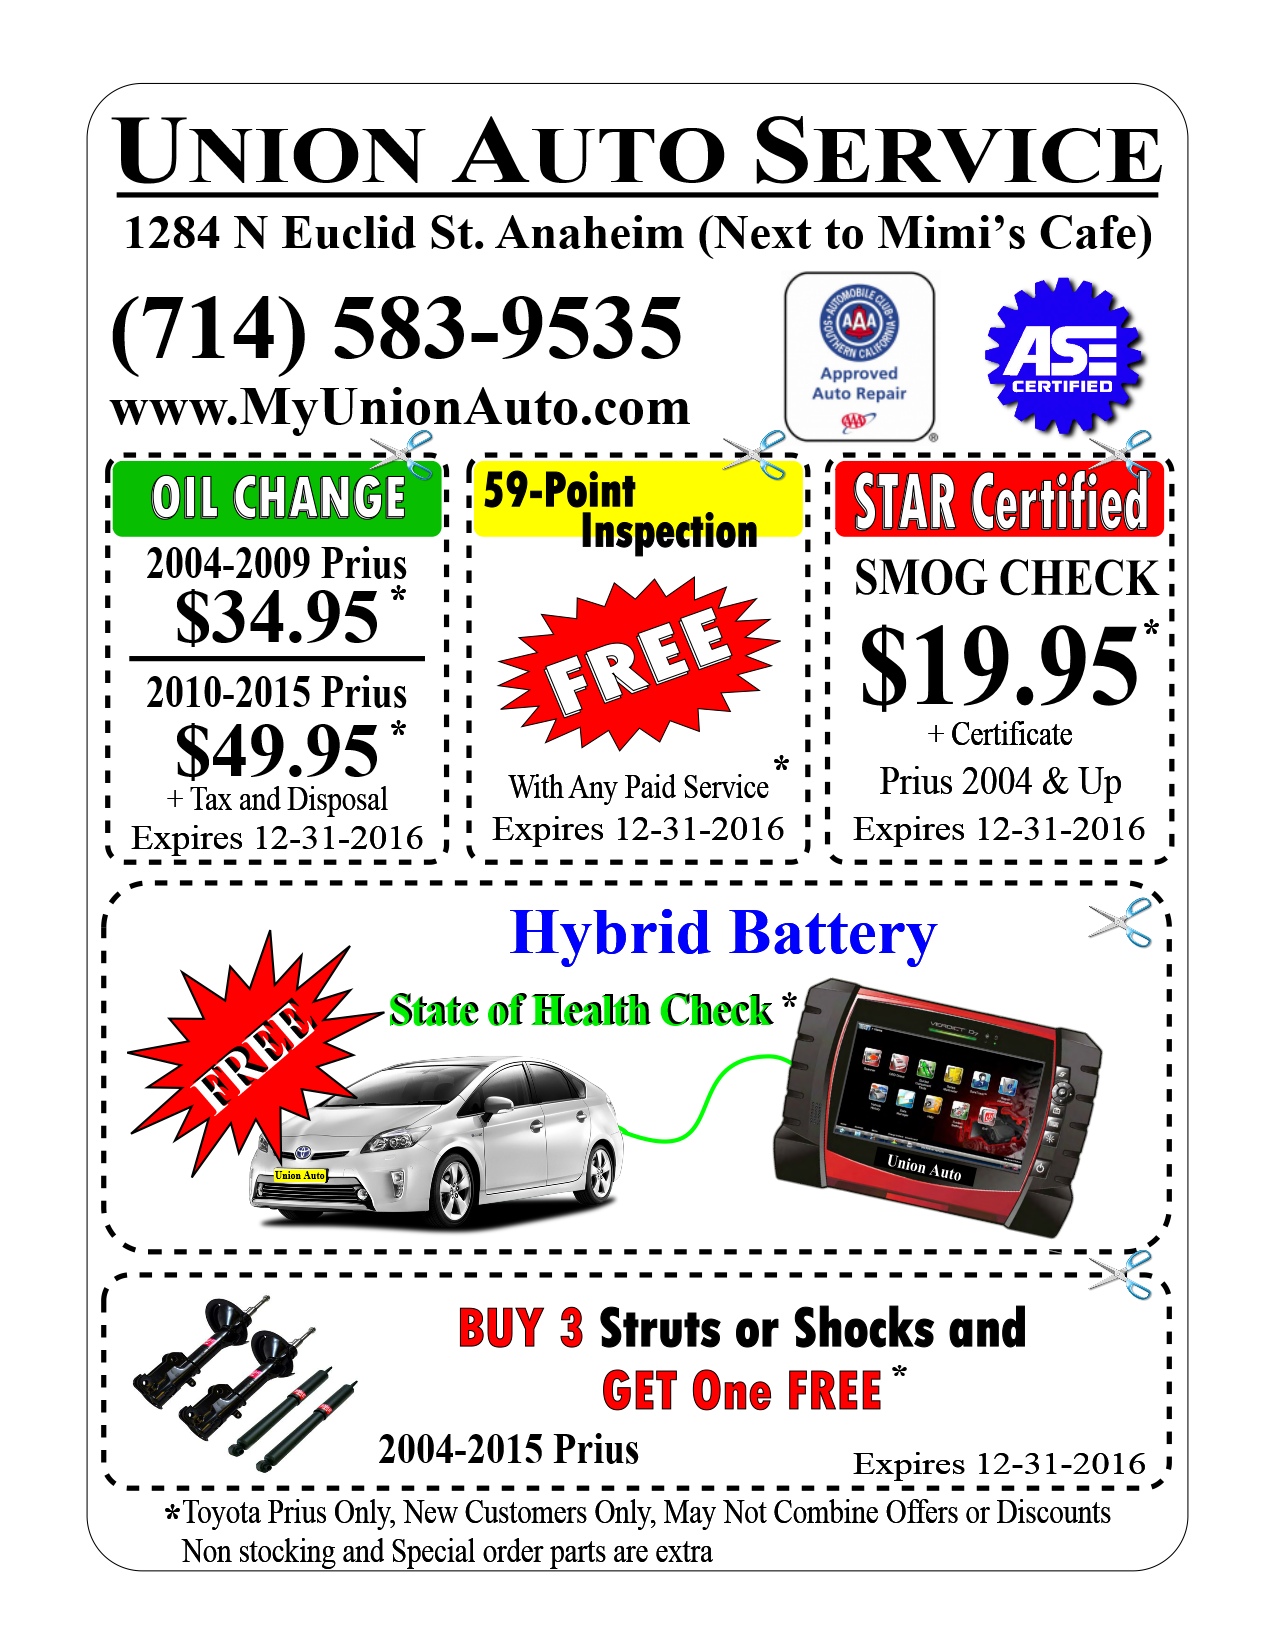 Free hybrid Battery test, prius maintenance required, prius maintenance, oil change coupon, discount coupons, smog check coupon, prius battery, toyota hybrid battery, Prius, Hybrid, Repair, Discount, Coupons, Ananehim